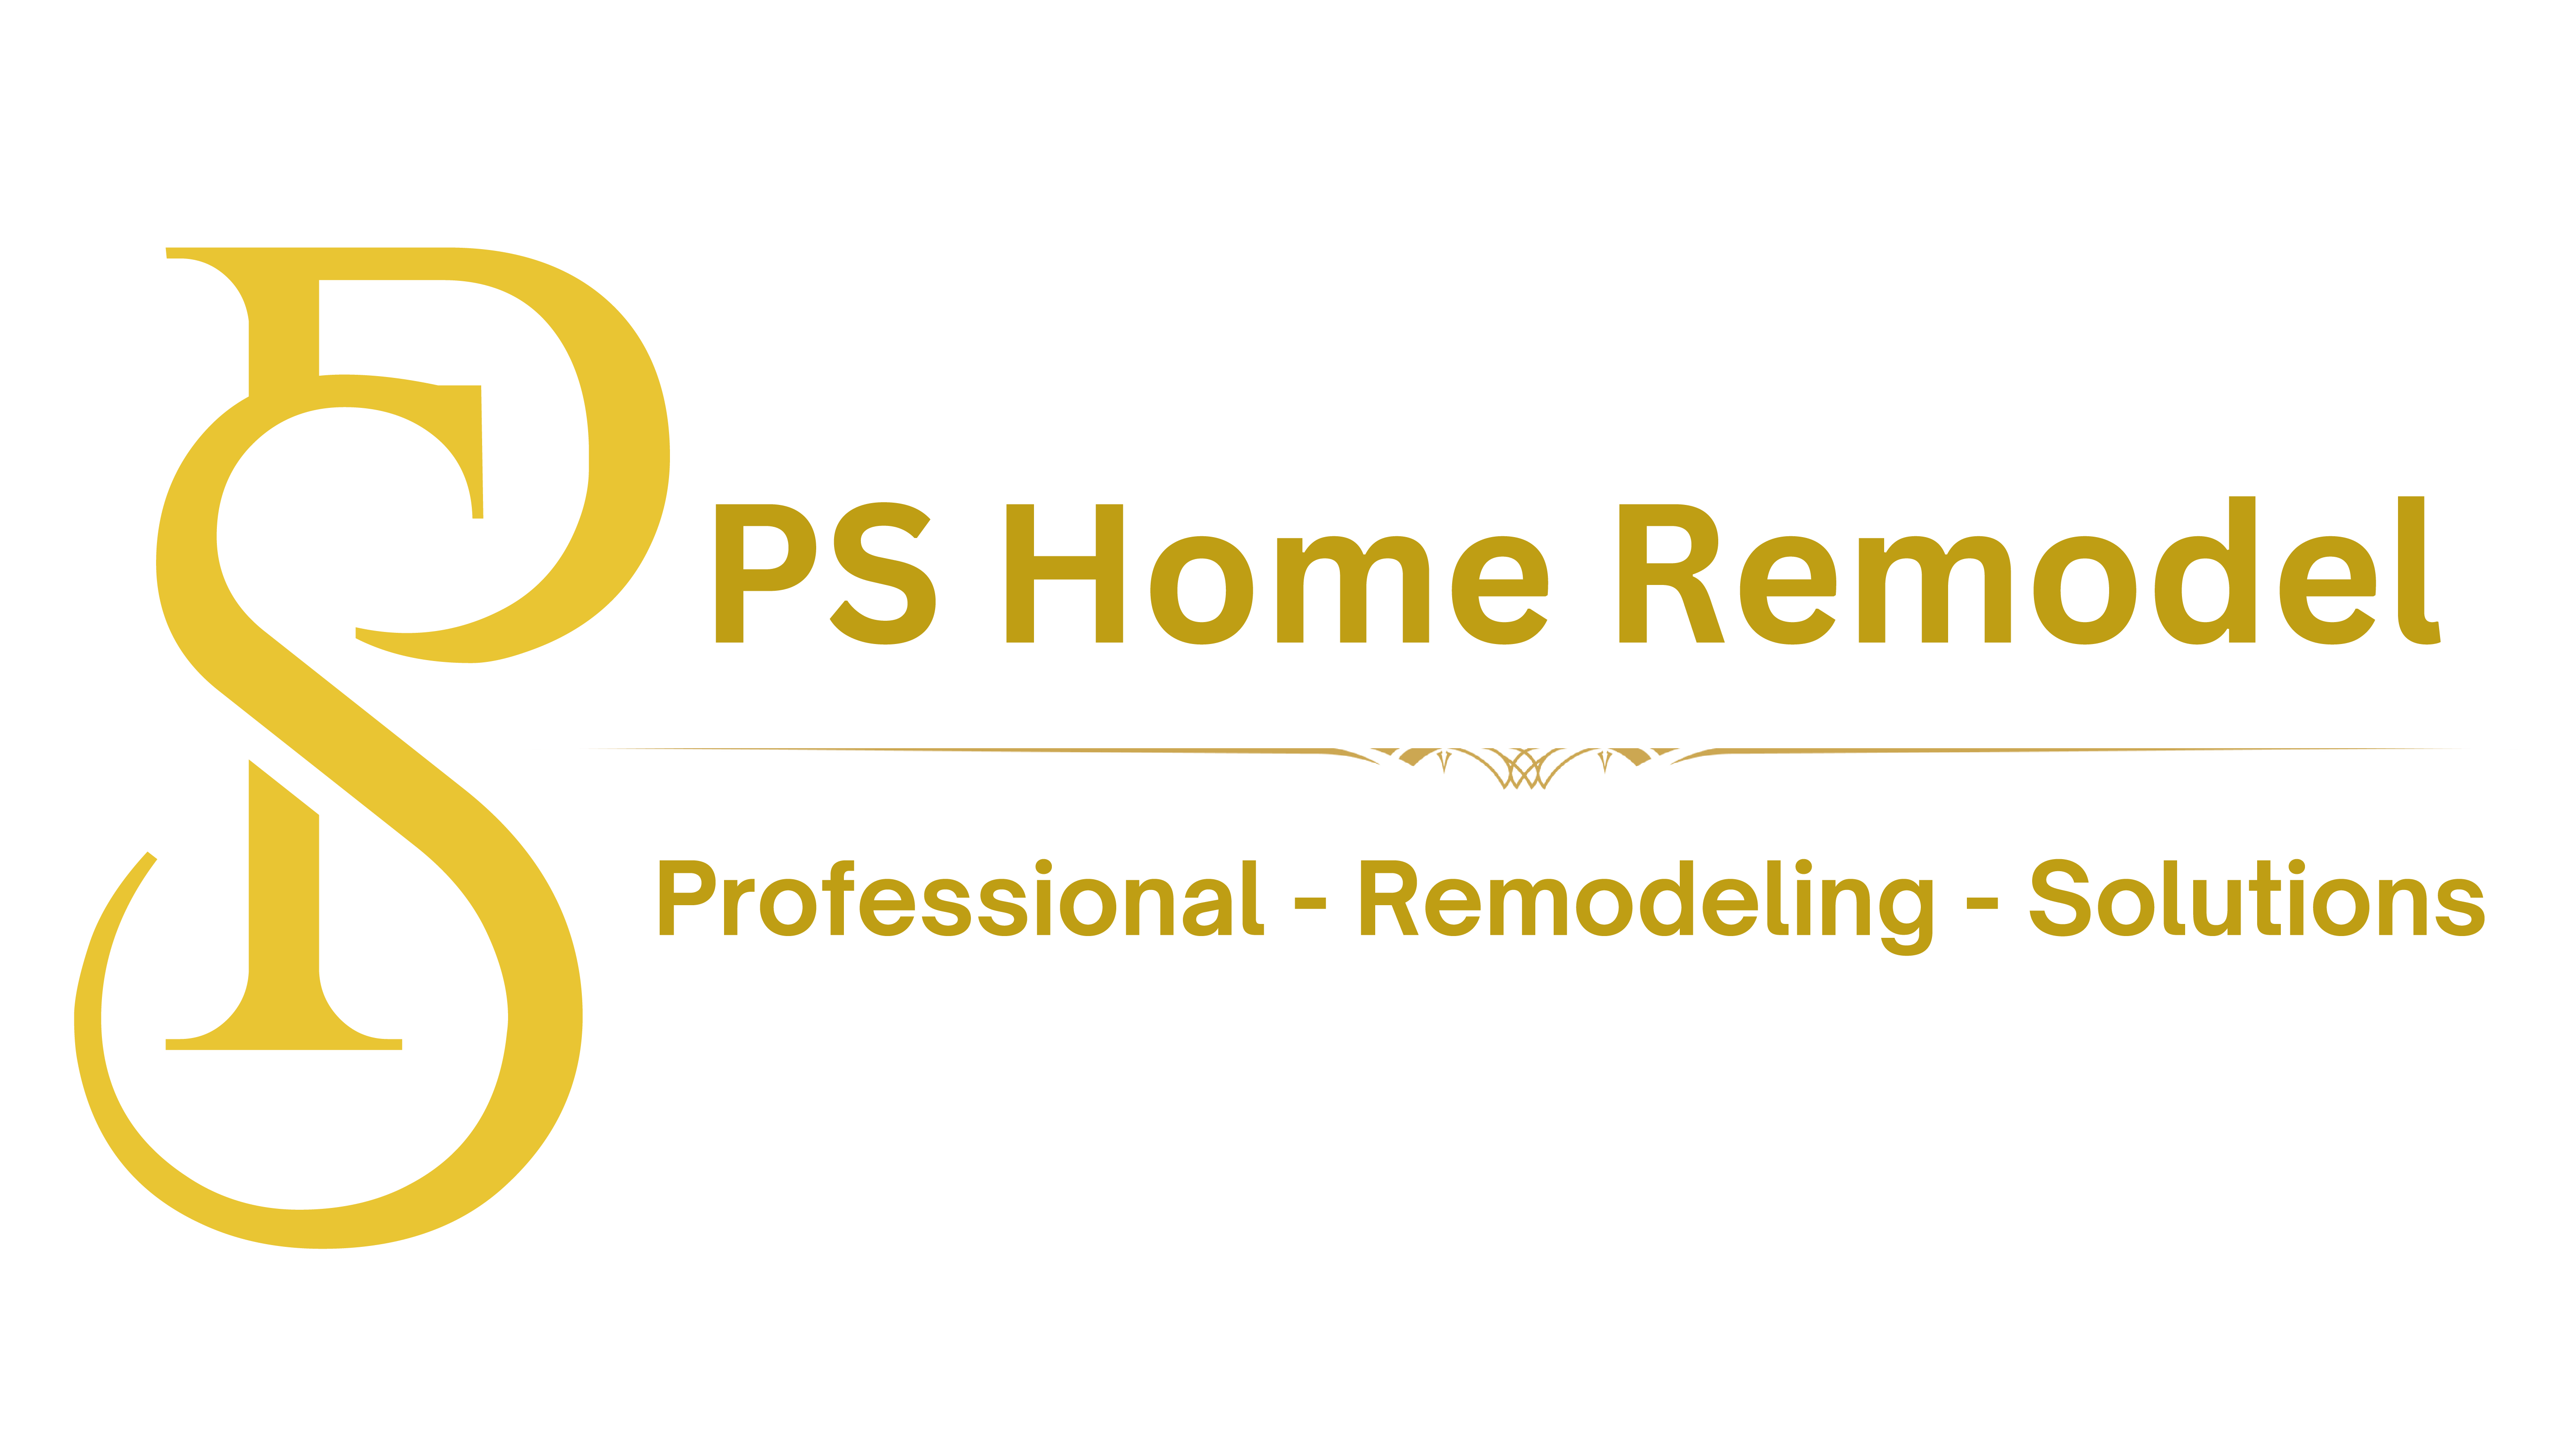 PS Home Remodel